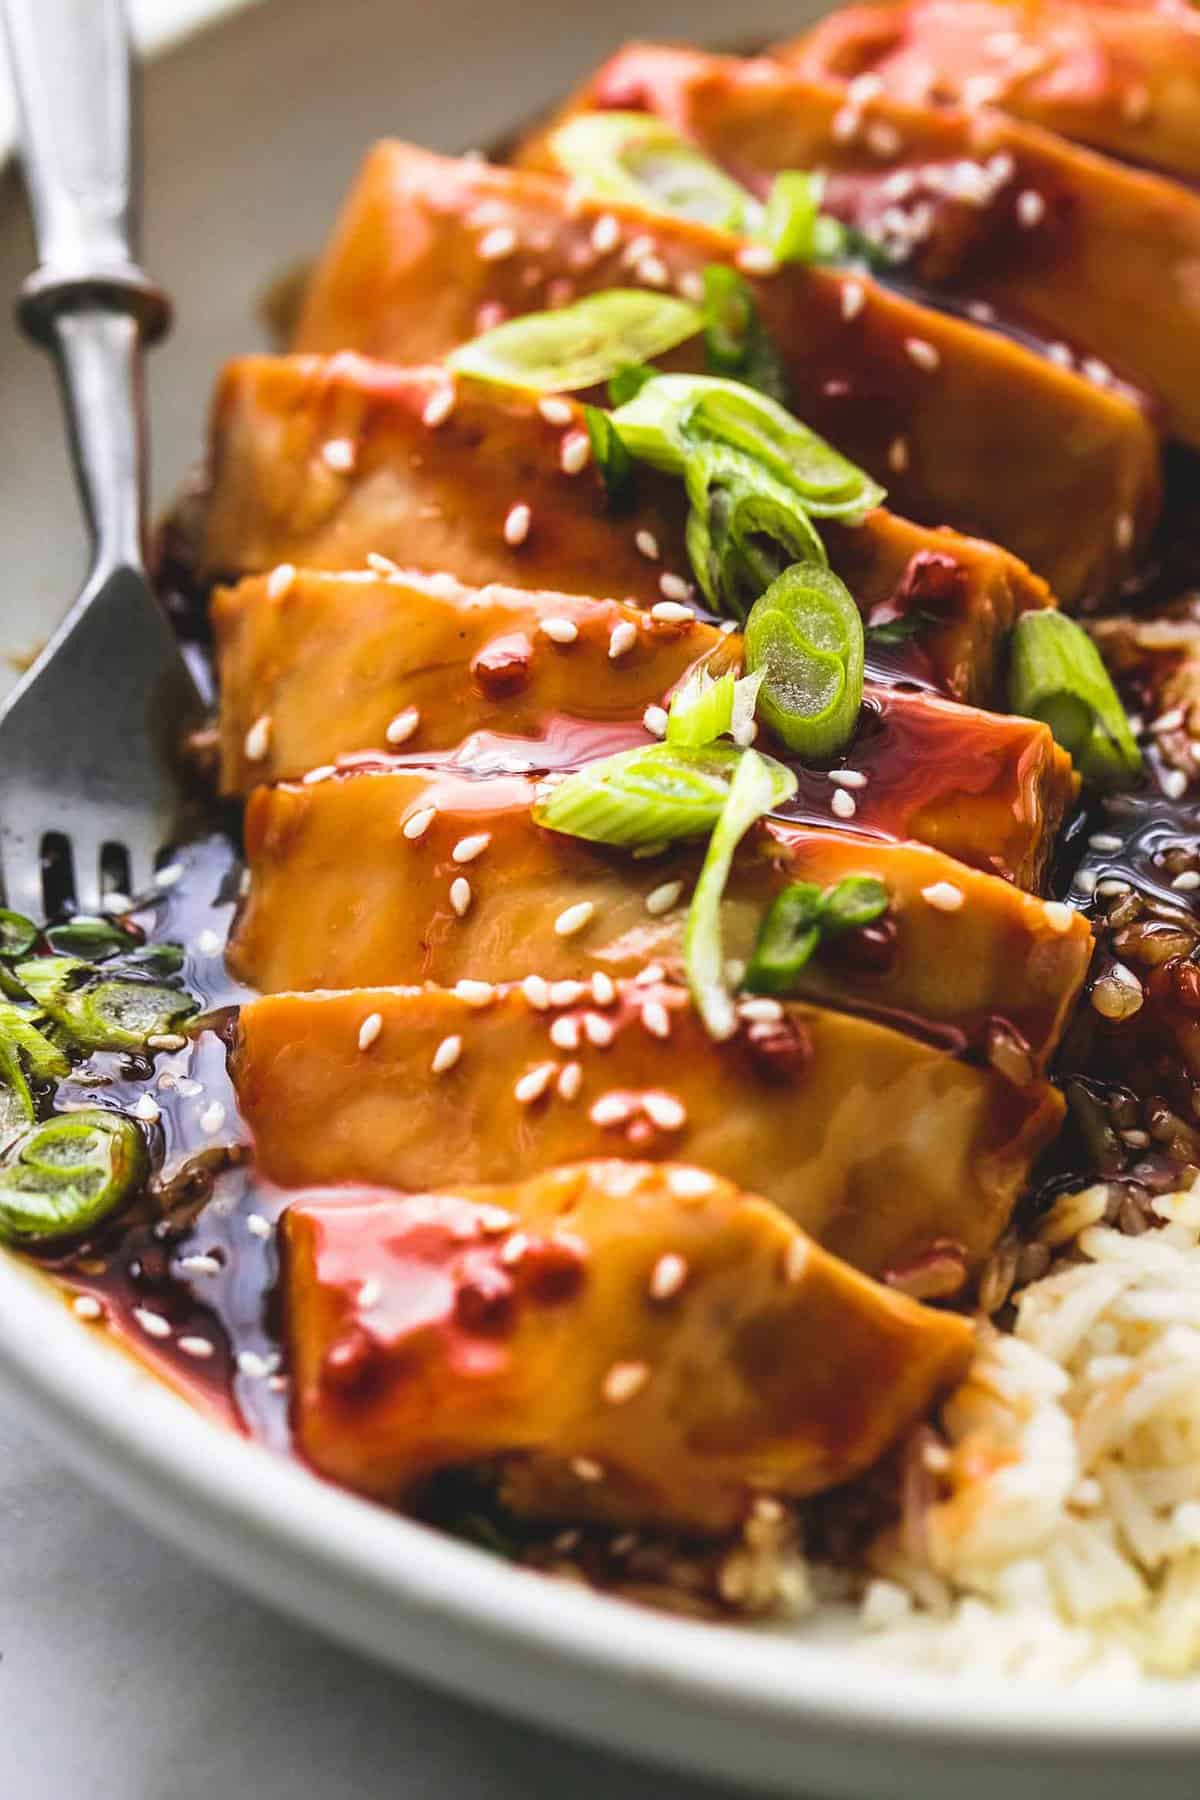 Best Ever Baked Teriyaki Chicken Get The Full Recipe On Creme de la Crumb. These 45+ mouth-watering healthy chicken breast recipes are all you need to start your week right! Easy, simple, perfect for lunch and dinner! Find oven-baked/ grilled/ slow cooker chicken breast recipes for kids to love!